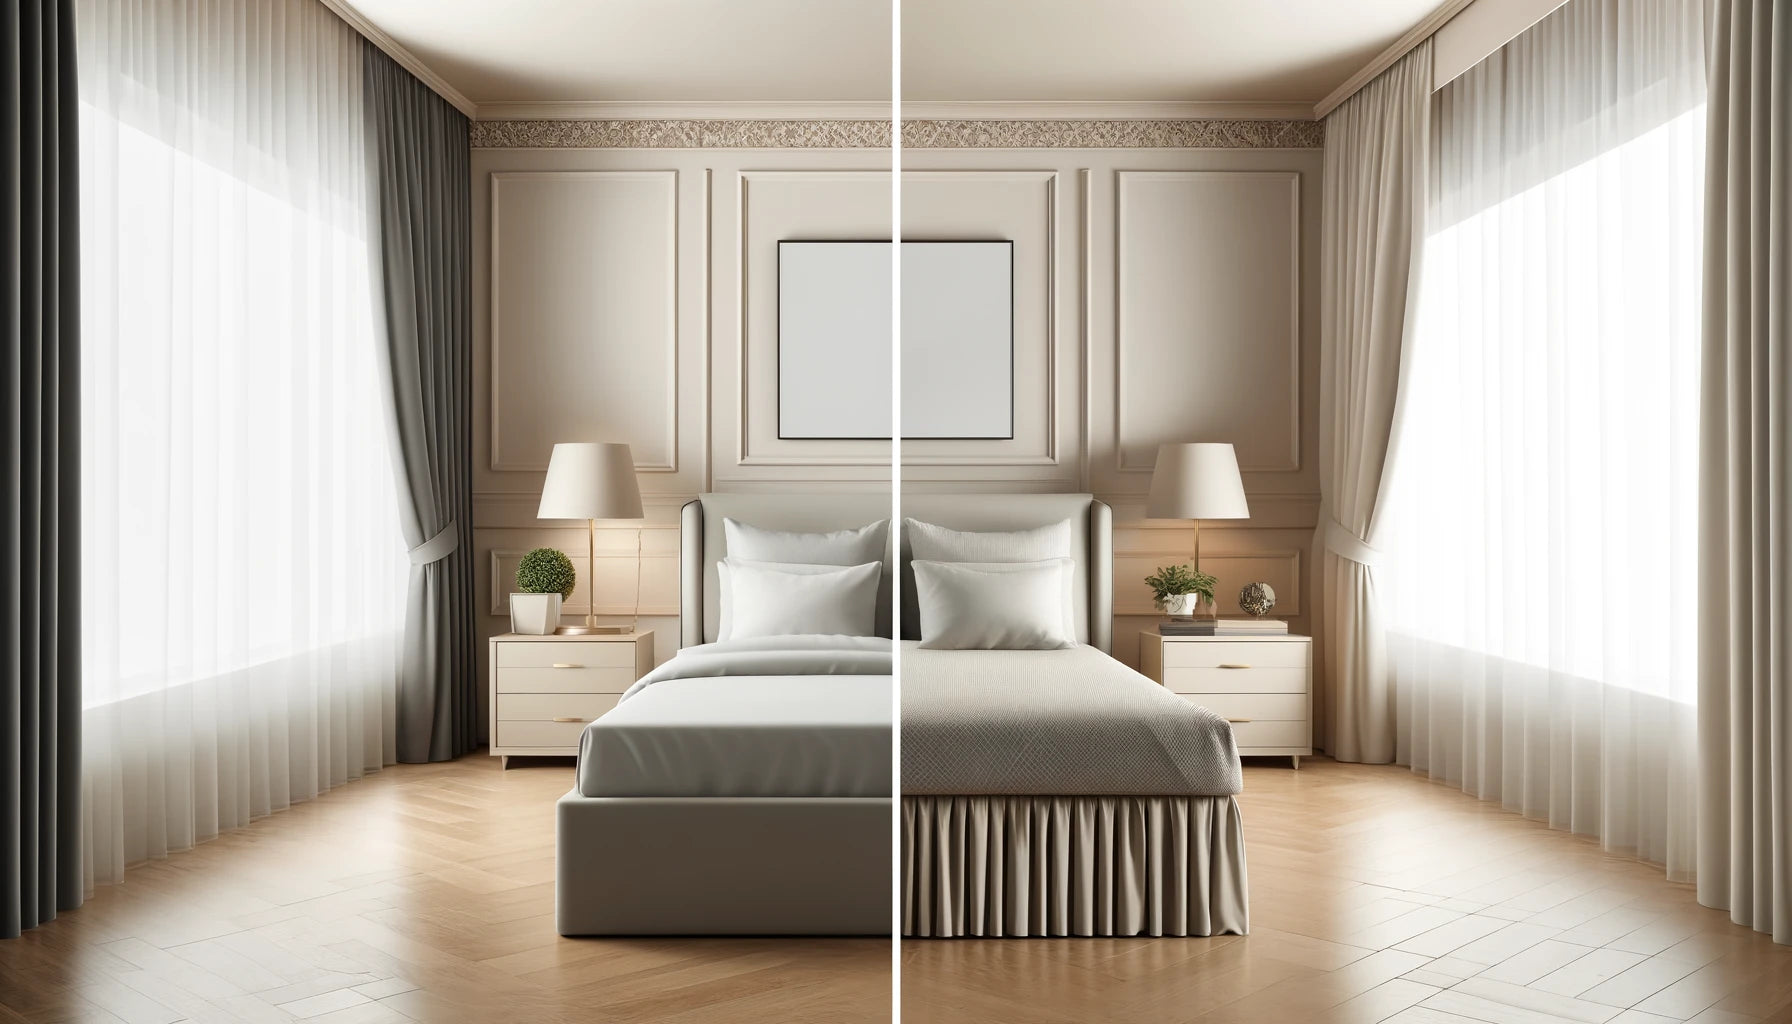 Bed Skirt vs No Bed Skirt: Which Enhances Your Bedroom Aesthetics?